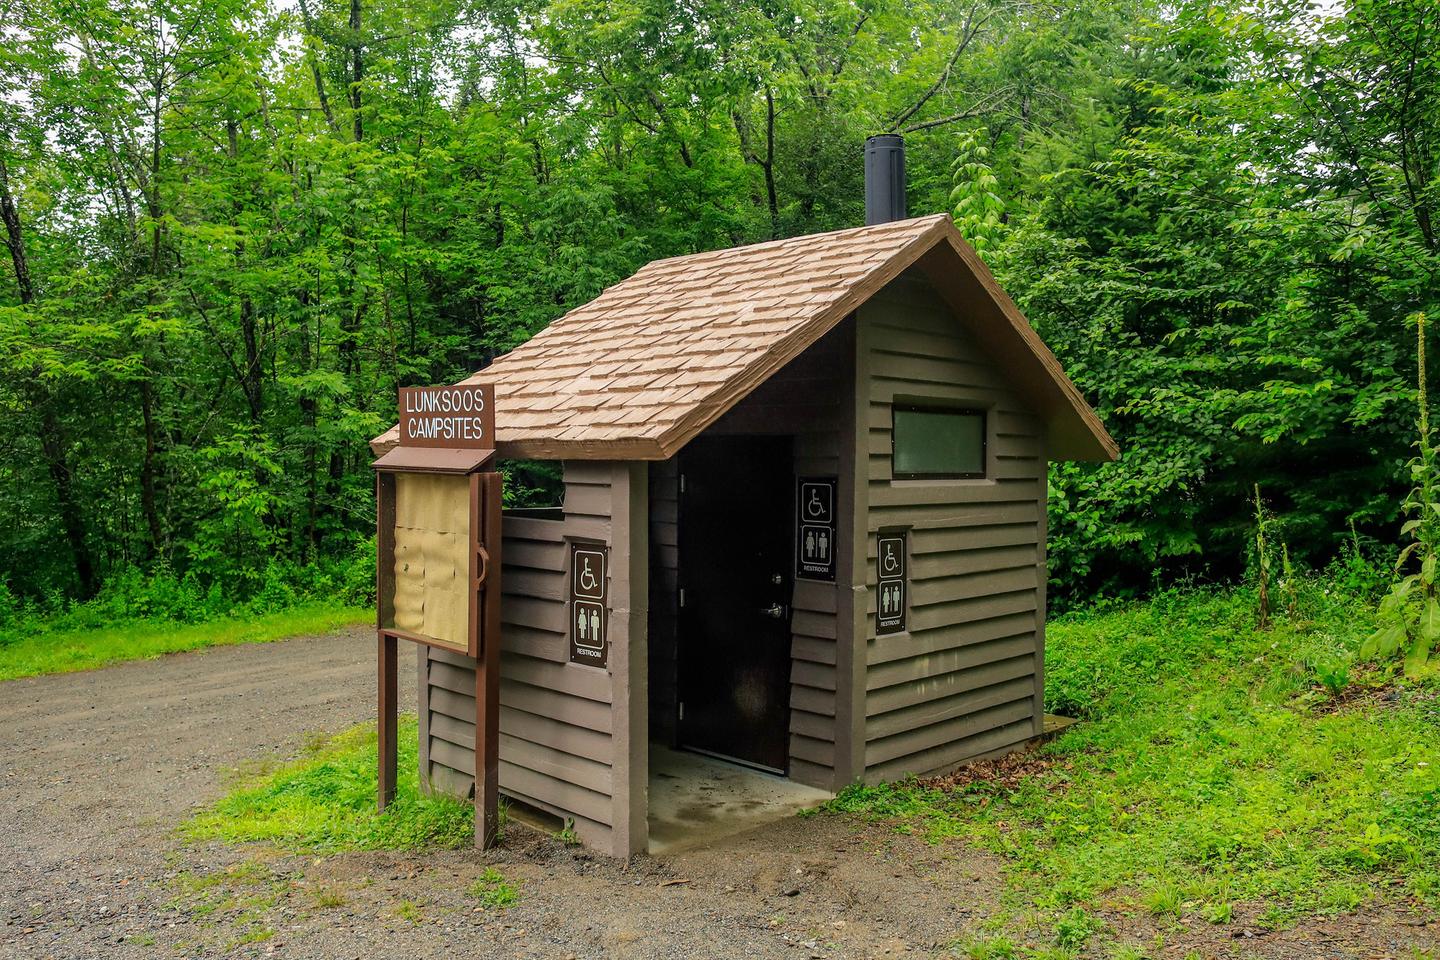 A small brown vault toilet building with an empty display sign against the left side of the building. The building is next to a gravel road with bright green grass on each side and tall trees.There is a vault toilet for use near the entrance of the campground parking lot.